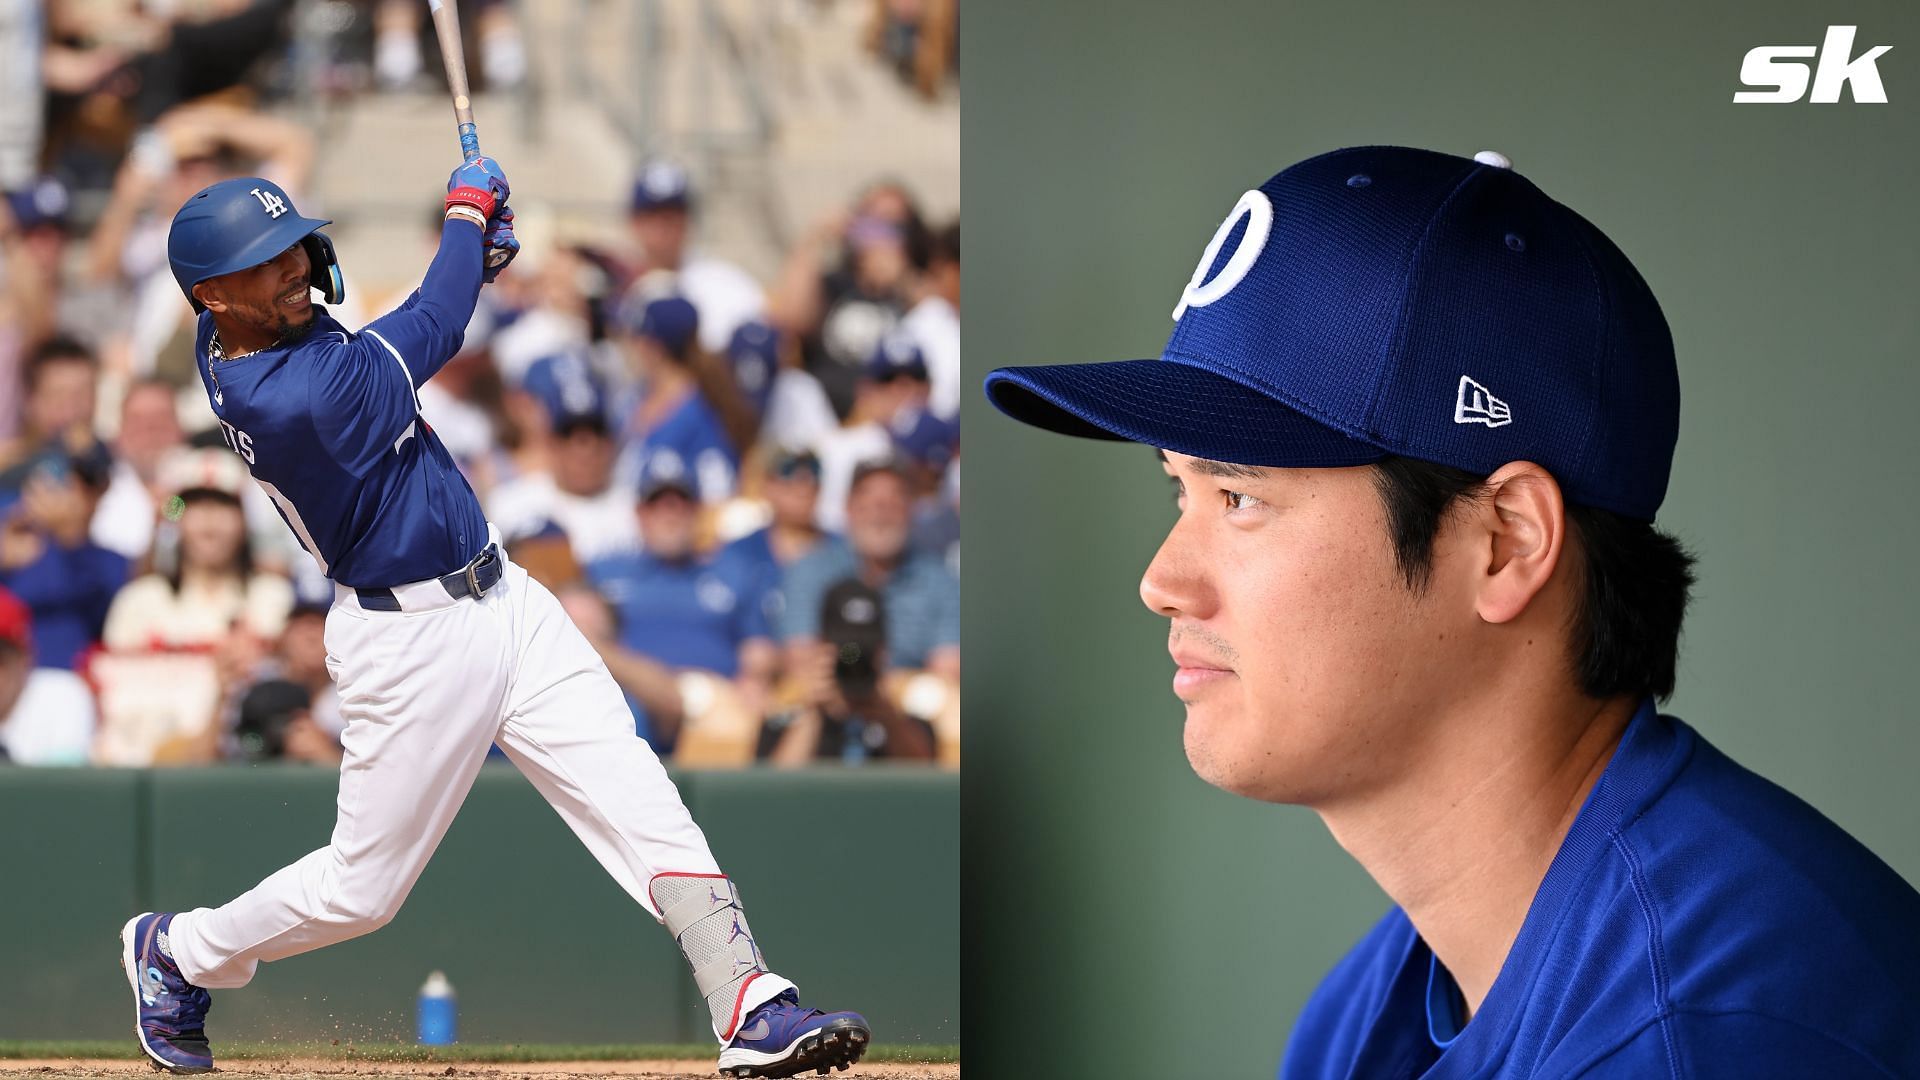 3 Dodgers players who have impressed in spring training so far